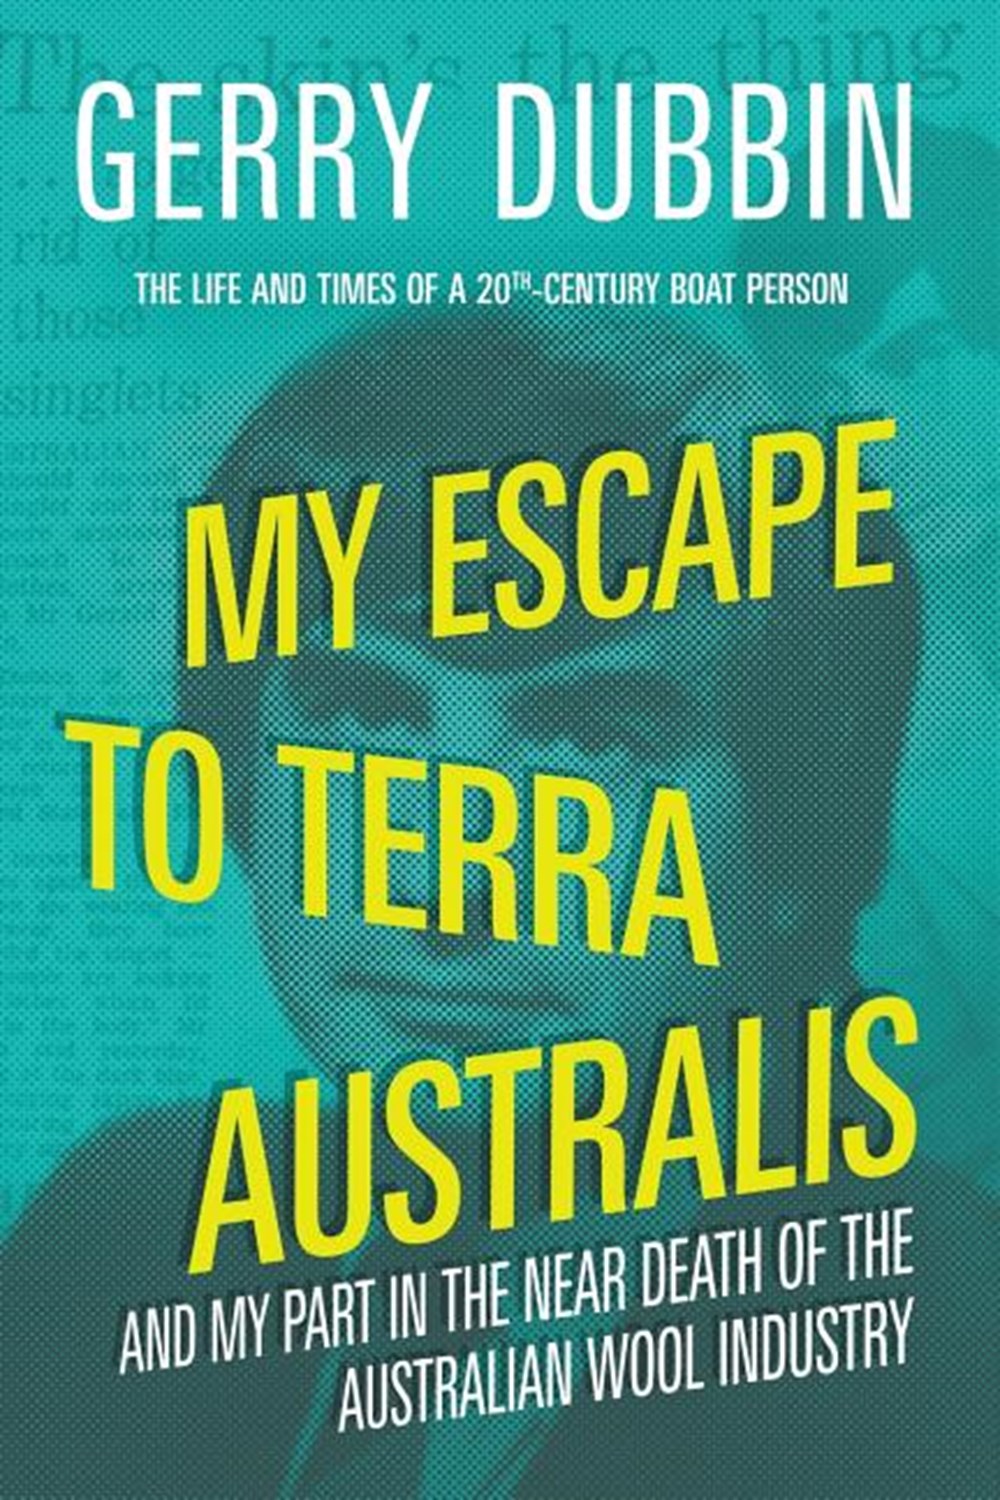 My Escape to Terra Australis: And My Part in the Near Death of the Australian Wool Industry